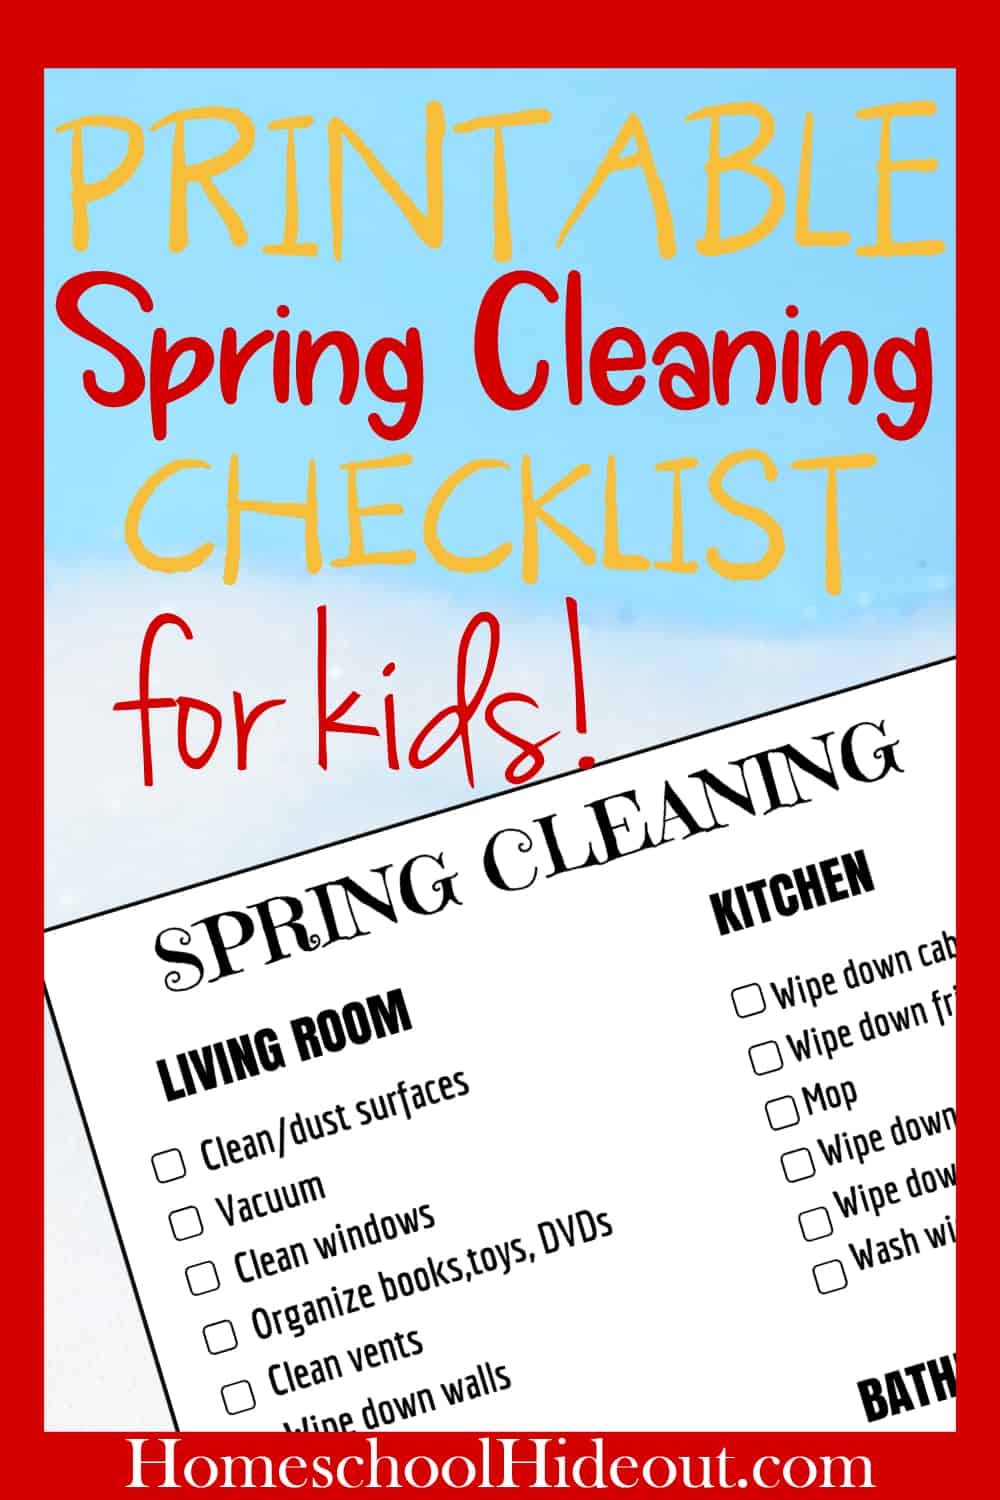 We're loving this spring cleaning checklist for kids! Your house will be sparkling in no time!